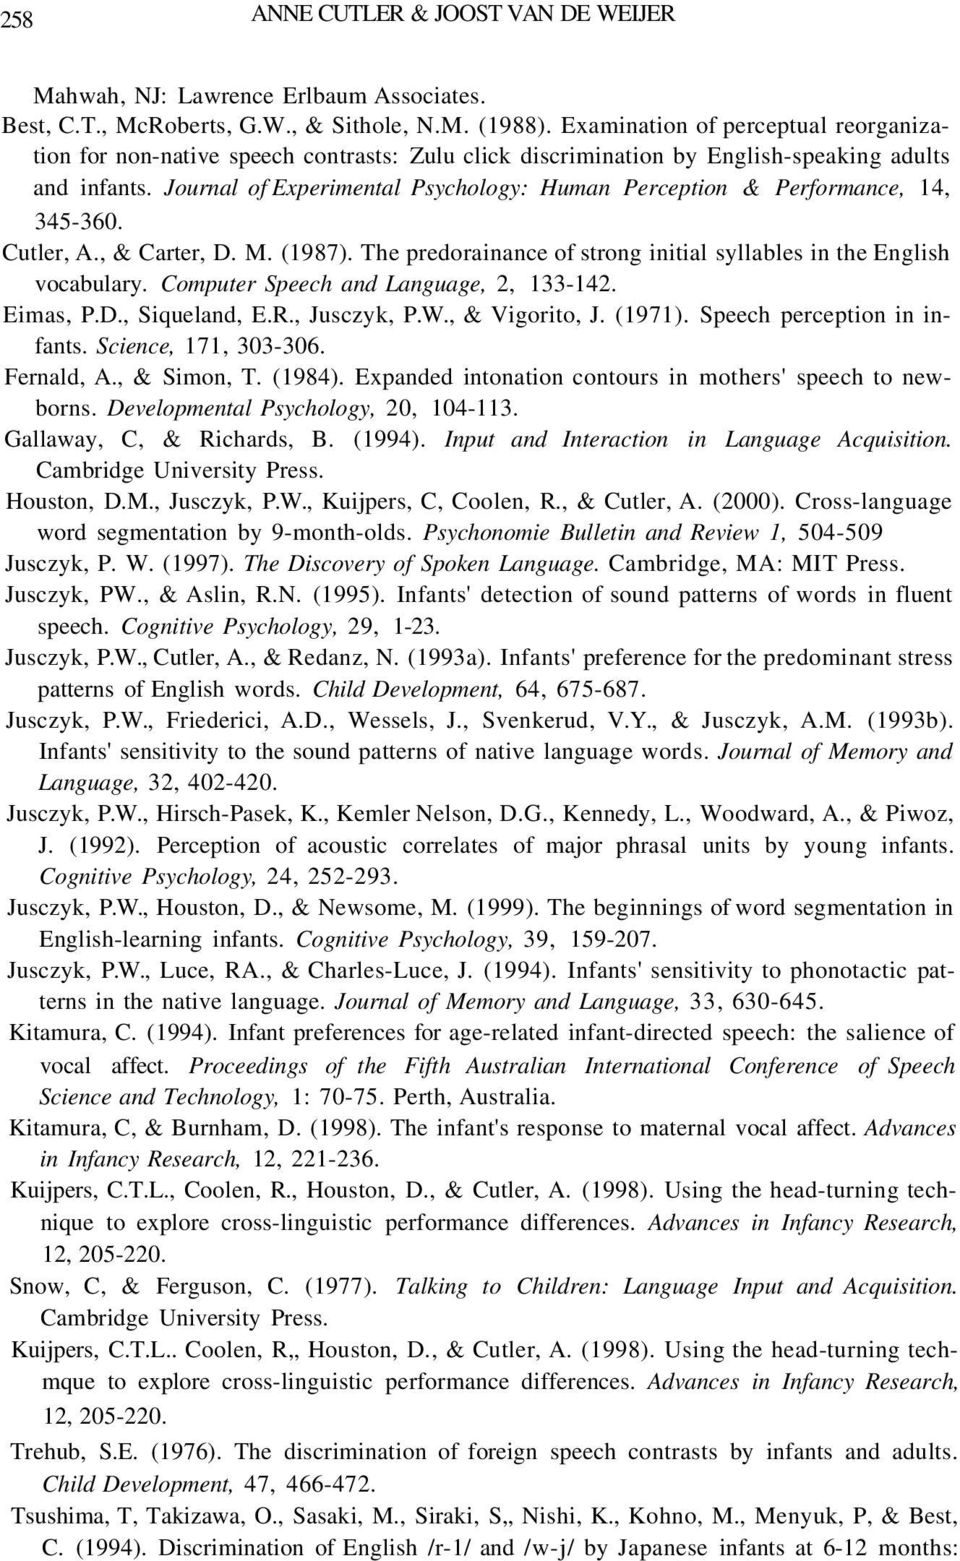 Journal of Experimental Psychology: Human Perception & Performance, 14, 345-360. Cutler, A., & Carter, D. M. (1987). The predorainance of strong initial syllables in the English vocabulary.